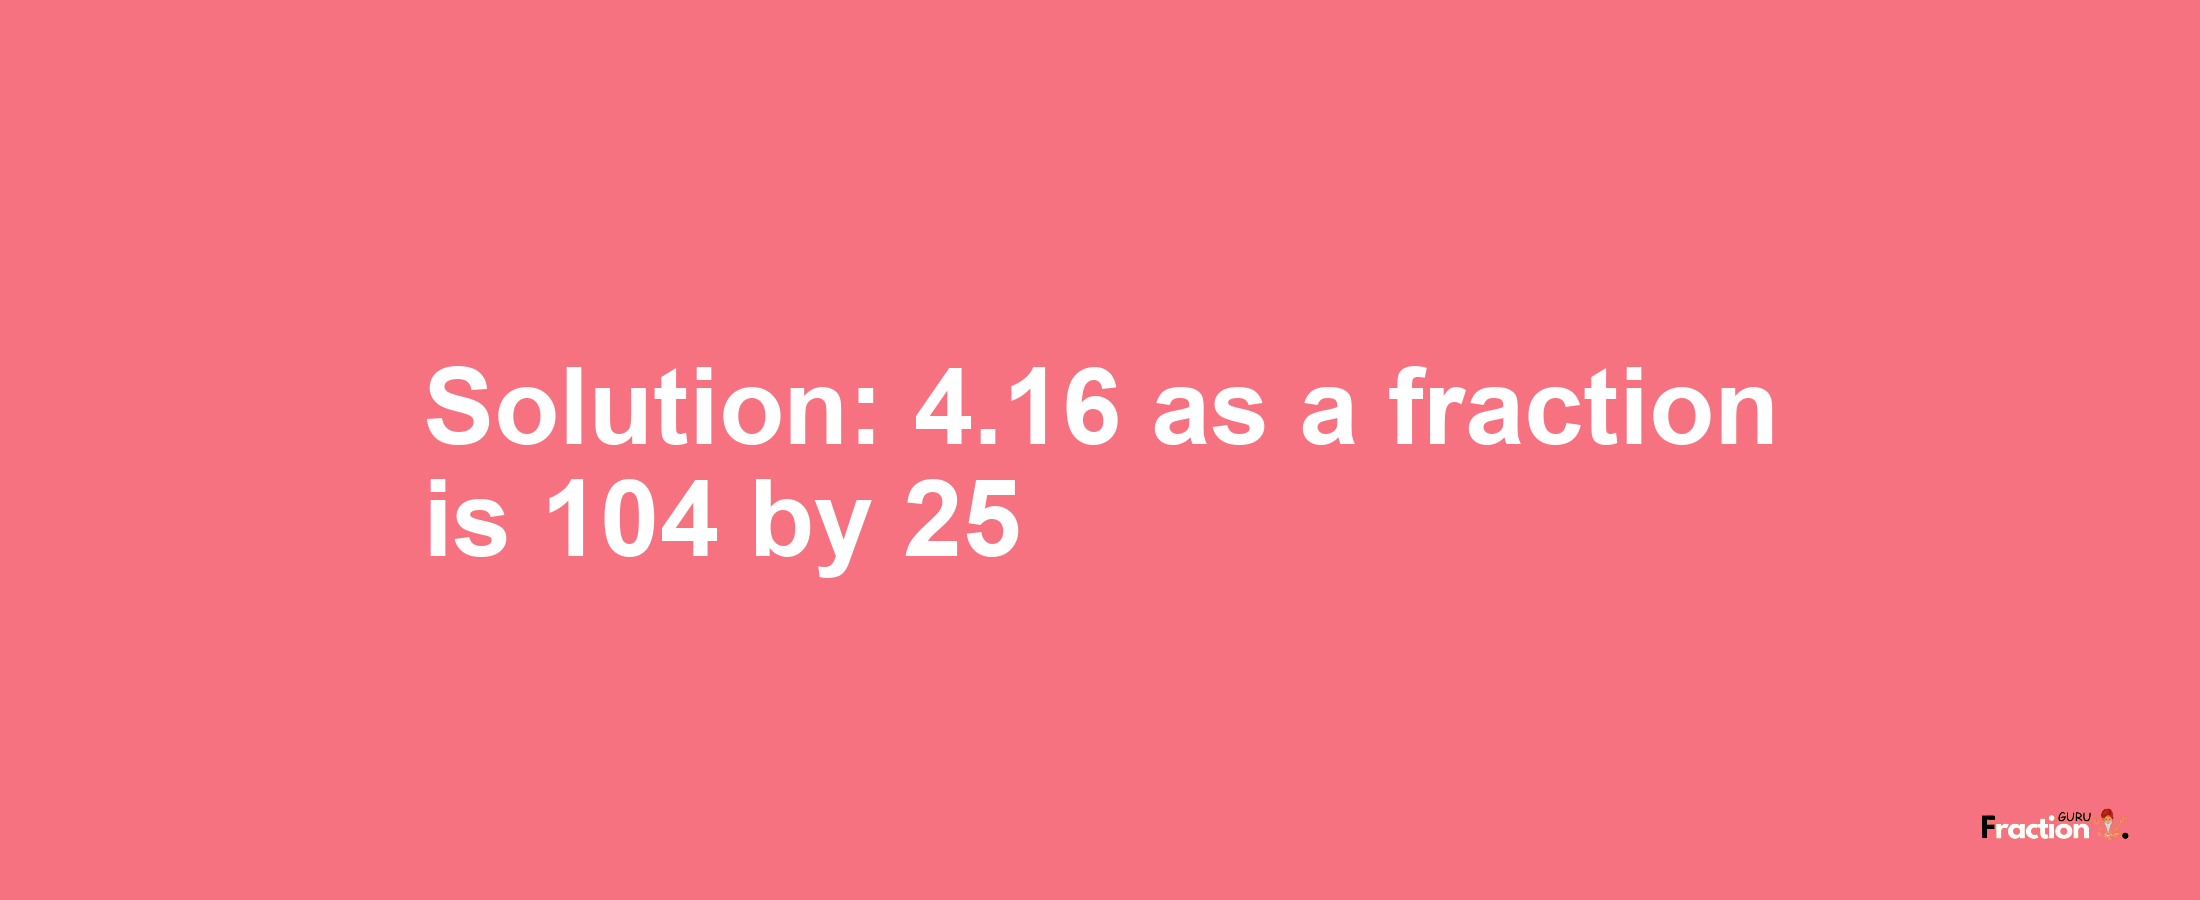 Solution:4.16 as a fraction is 104/25